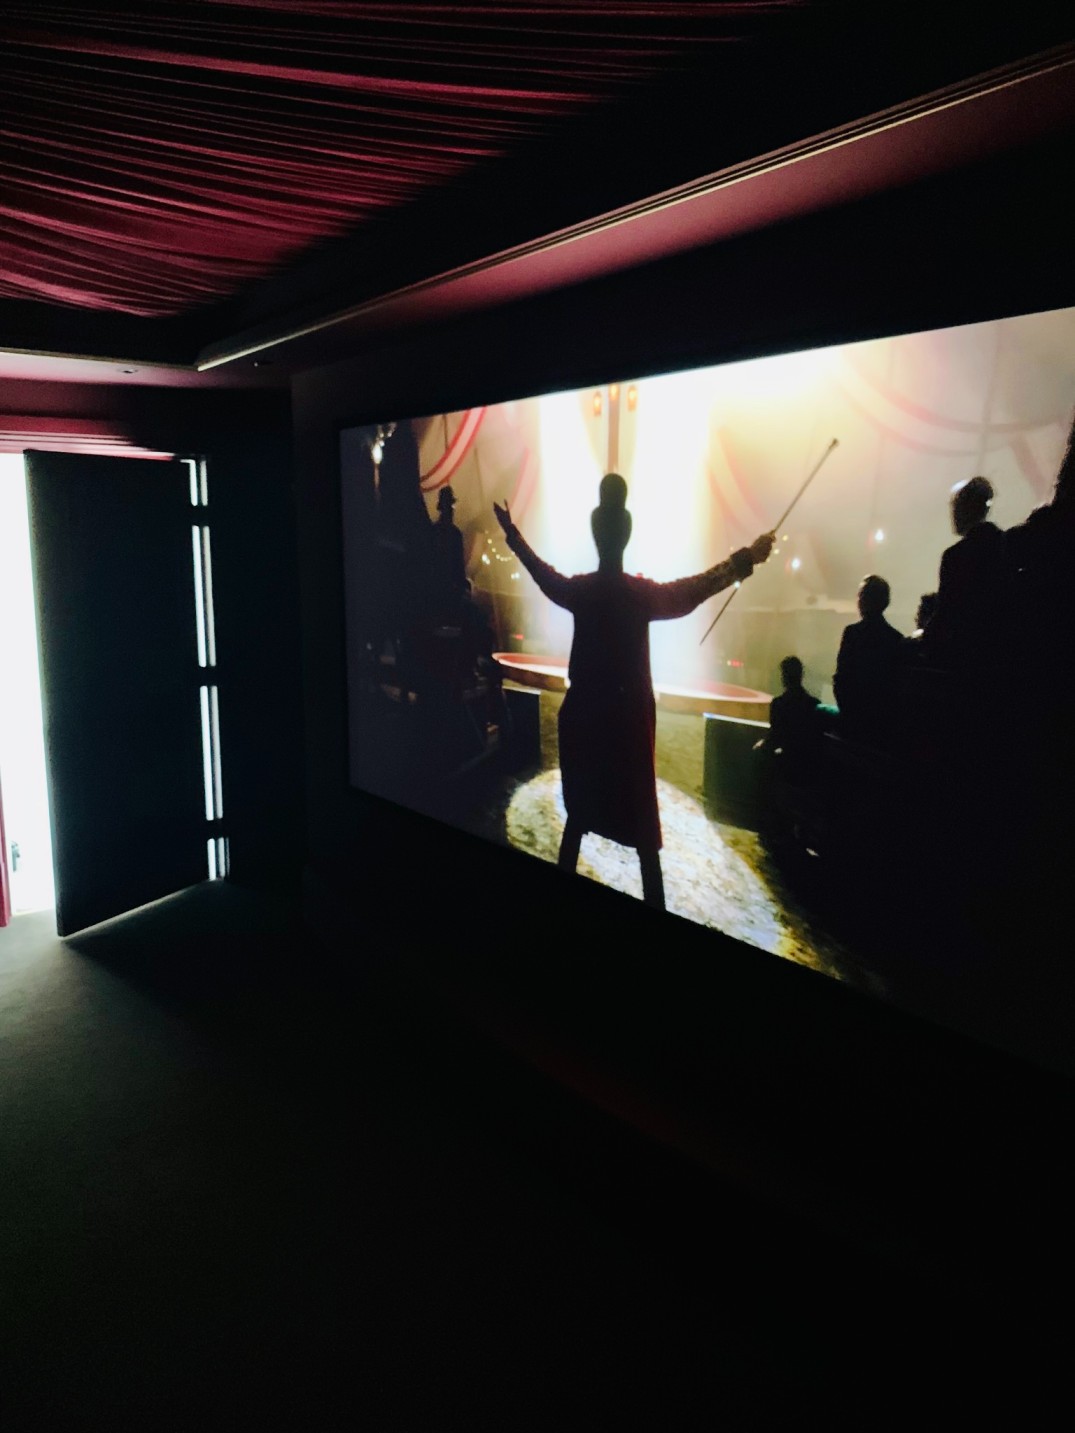 Home cinema room showcasing projector screen with movie showing